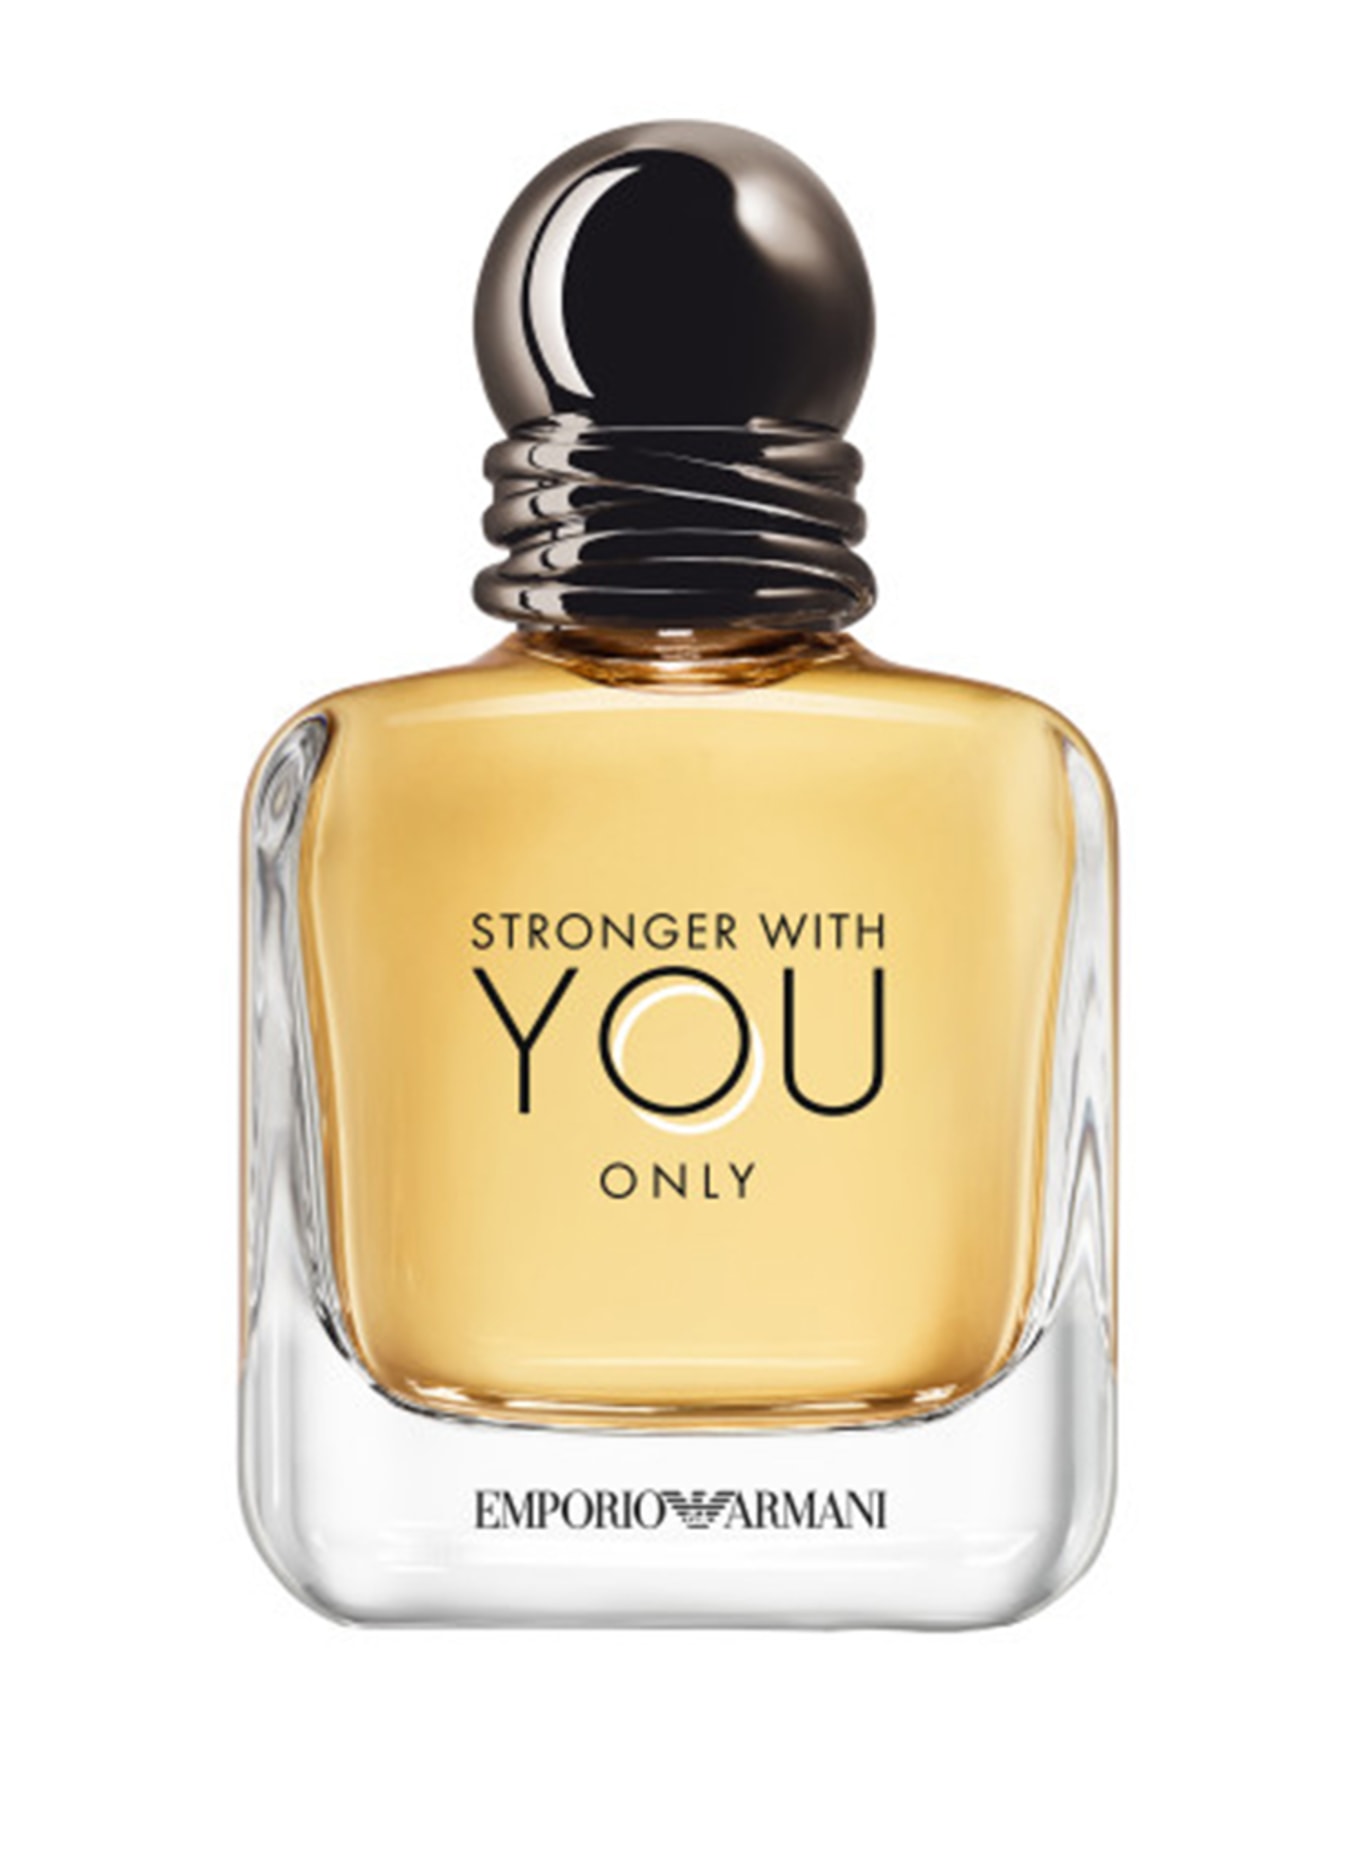 EMPORIO ARMANI STRONGER WITH YOU ONLY (Obrázek 1)